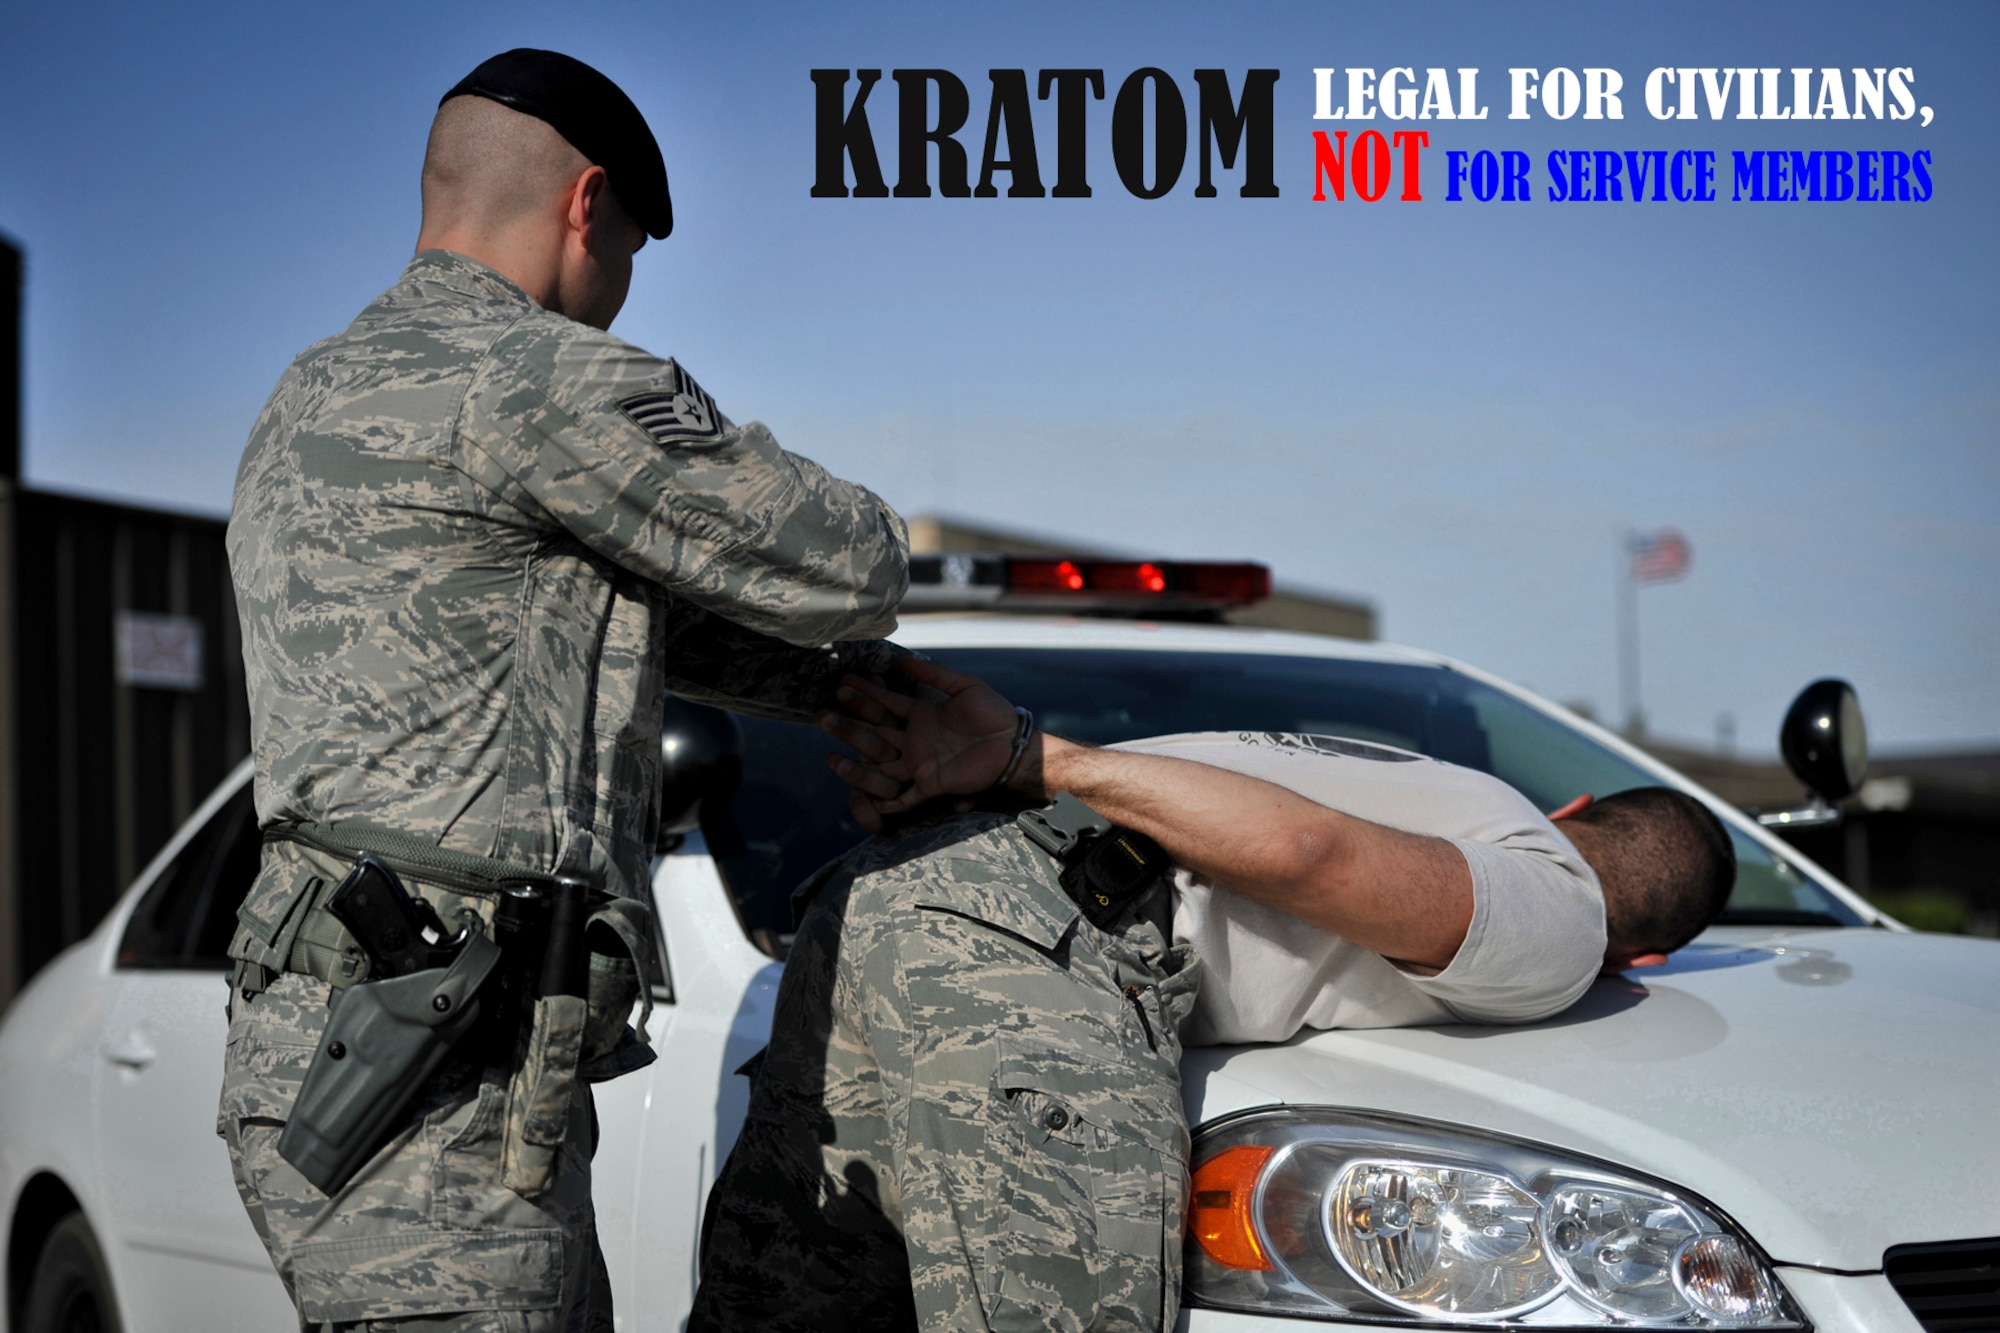 GOODFELLOW AIR FORCE BASE, Texas – Kratom is an organic substance that when ingested, mimics the effects of opiates. It can still be purchased legally from smoke shops or over the Internet and is advertised as a legal drug; however, it is not approved for use by military members, and may result in judicial action. (U.S. Air Force photo illustration/ Airman 1st Class Devin Boyer)